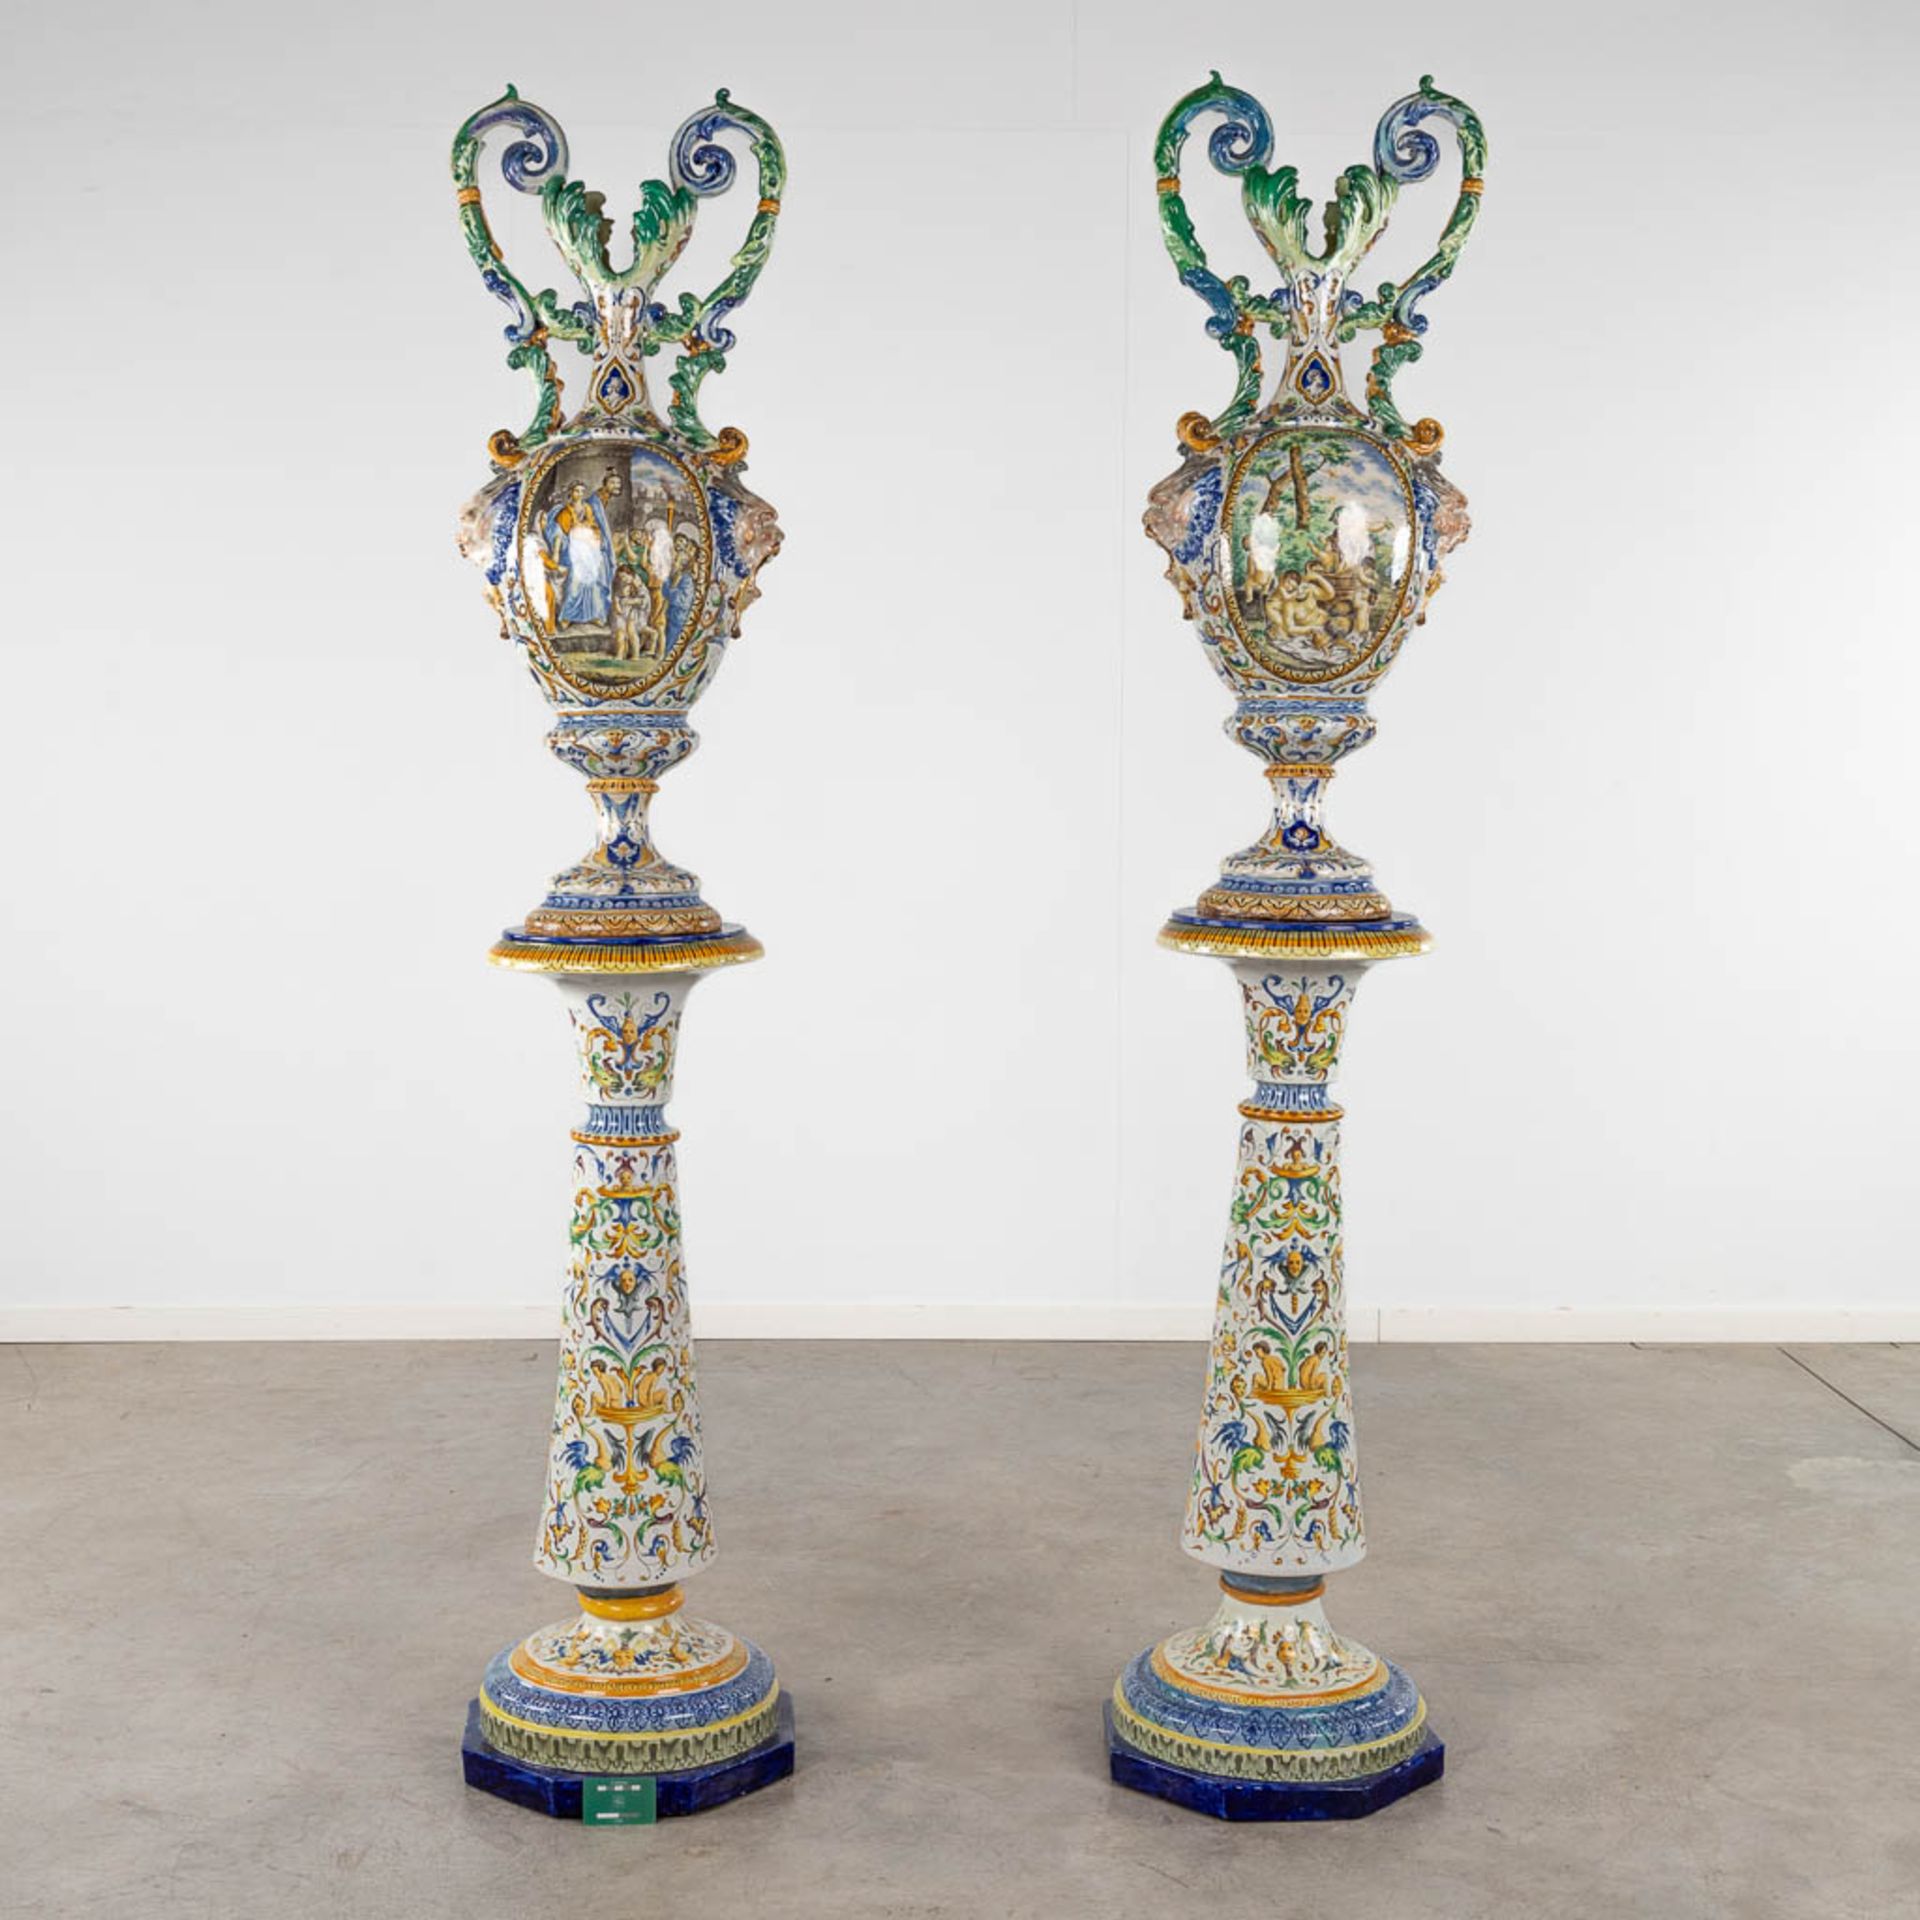 A pair of large vases, Italian Renaissance style, glazed faience. 20th C. (D:45 x W:45 x H:205 cm) - Image 24 of 31